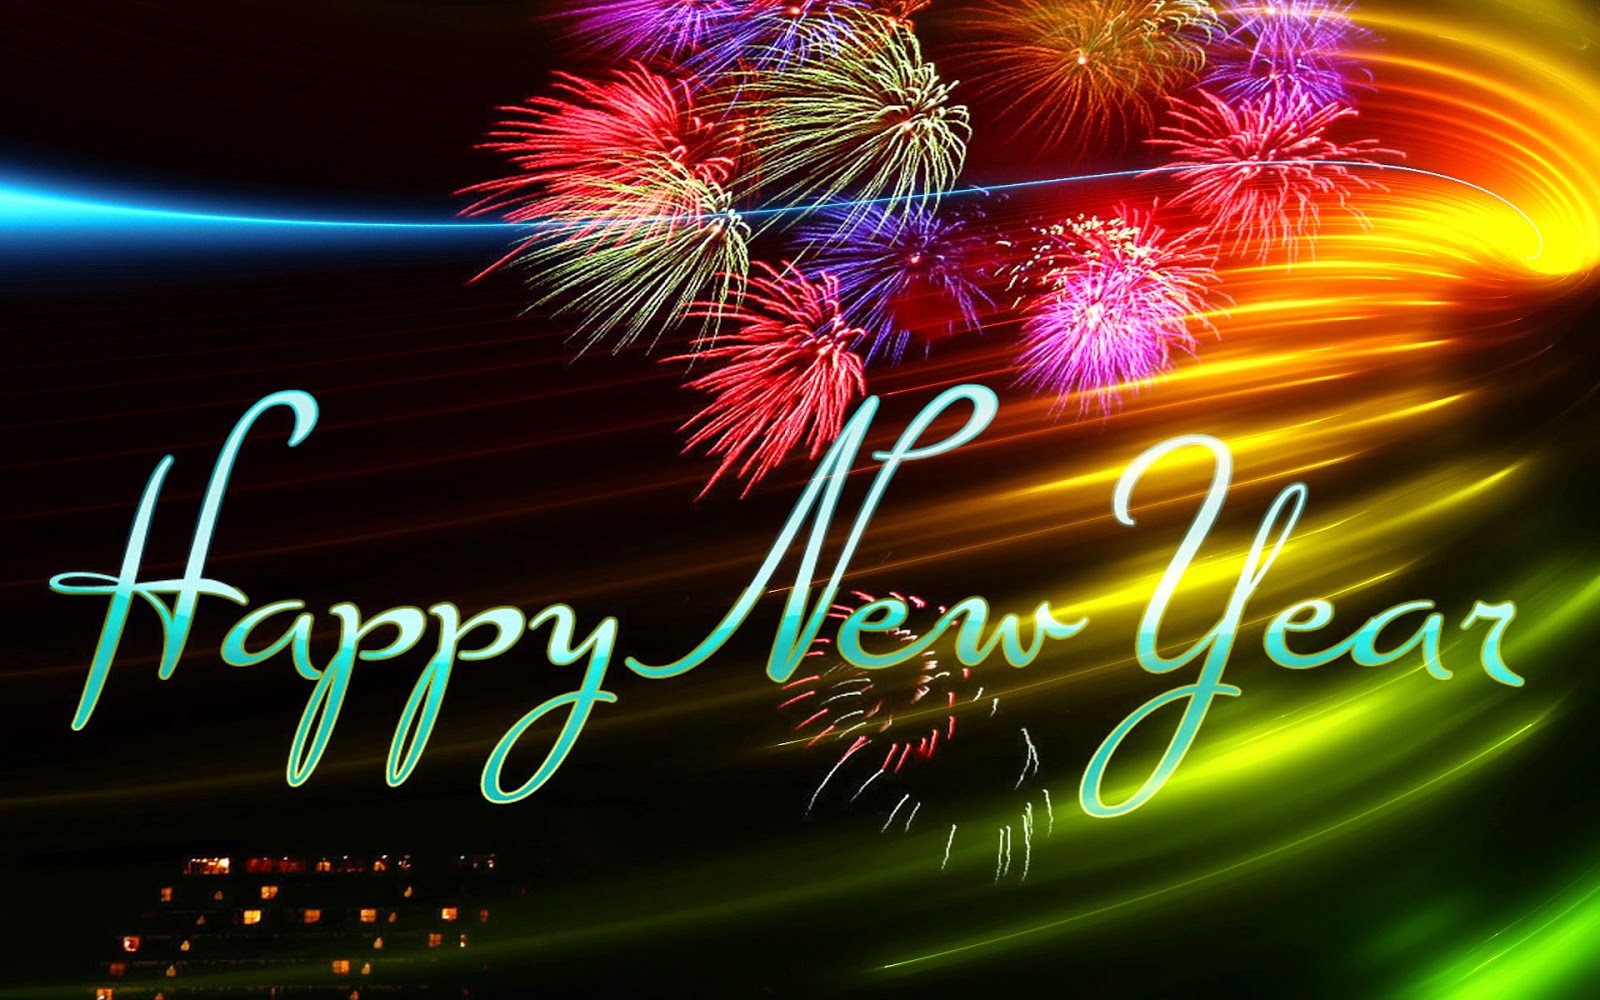  happy new year 2016 welcome new year wallpaper 2016 wallpaper download 1600x1000